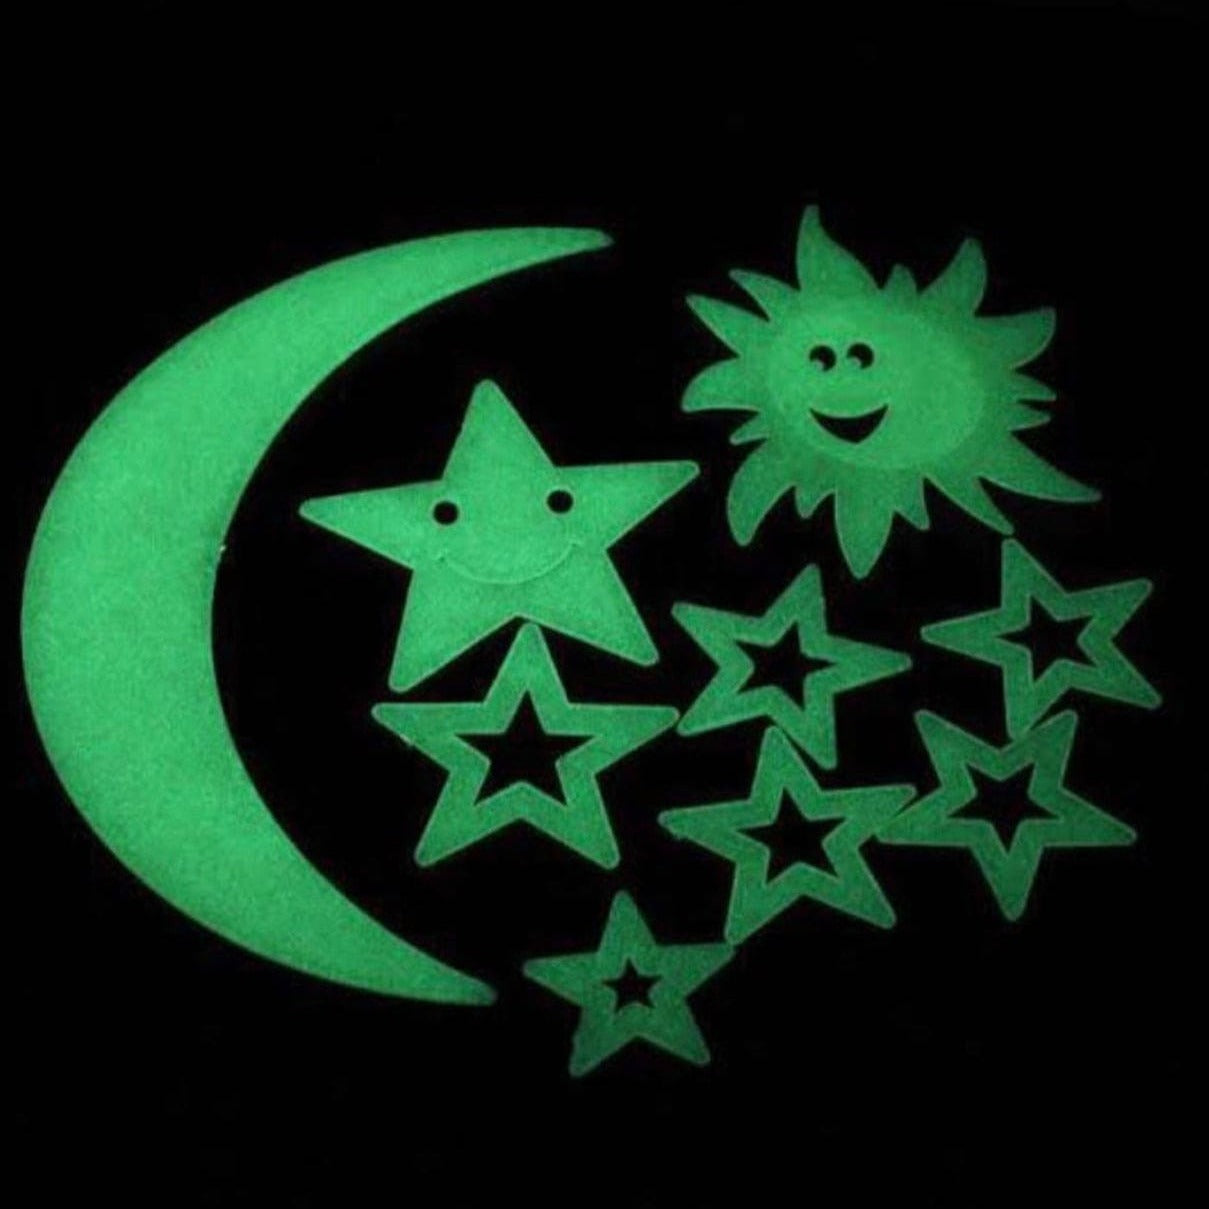 Set Of 10 Luminous Wall Sticker, Glow In The Dark Star Sticker Decor For Kids, Baby Room Colorful Fluorescent Sticker Home Decor